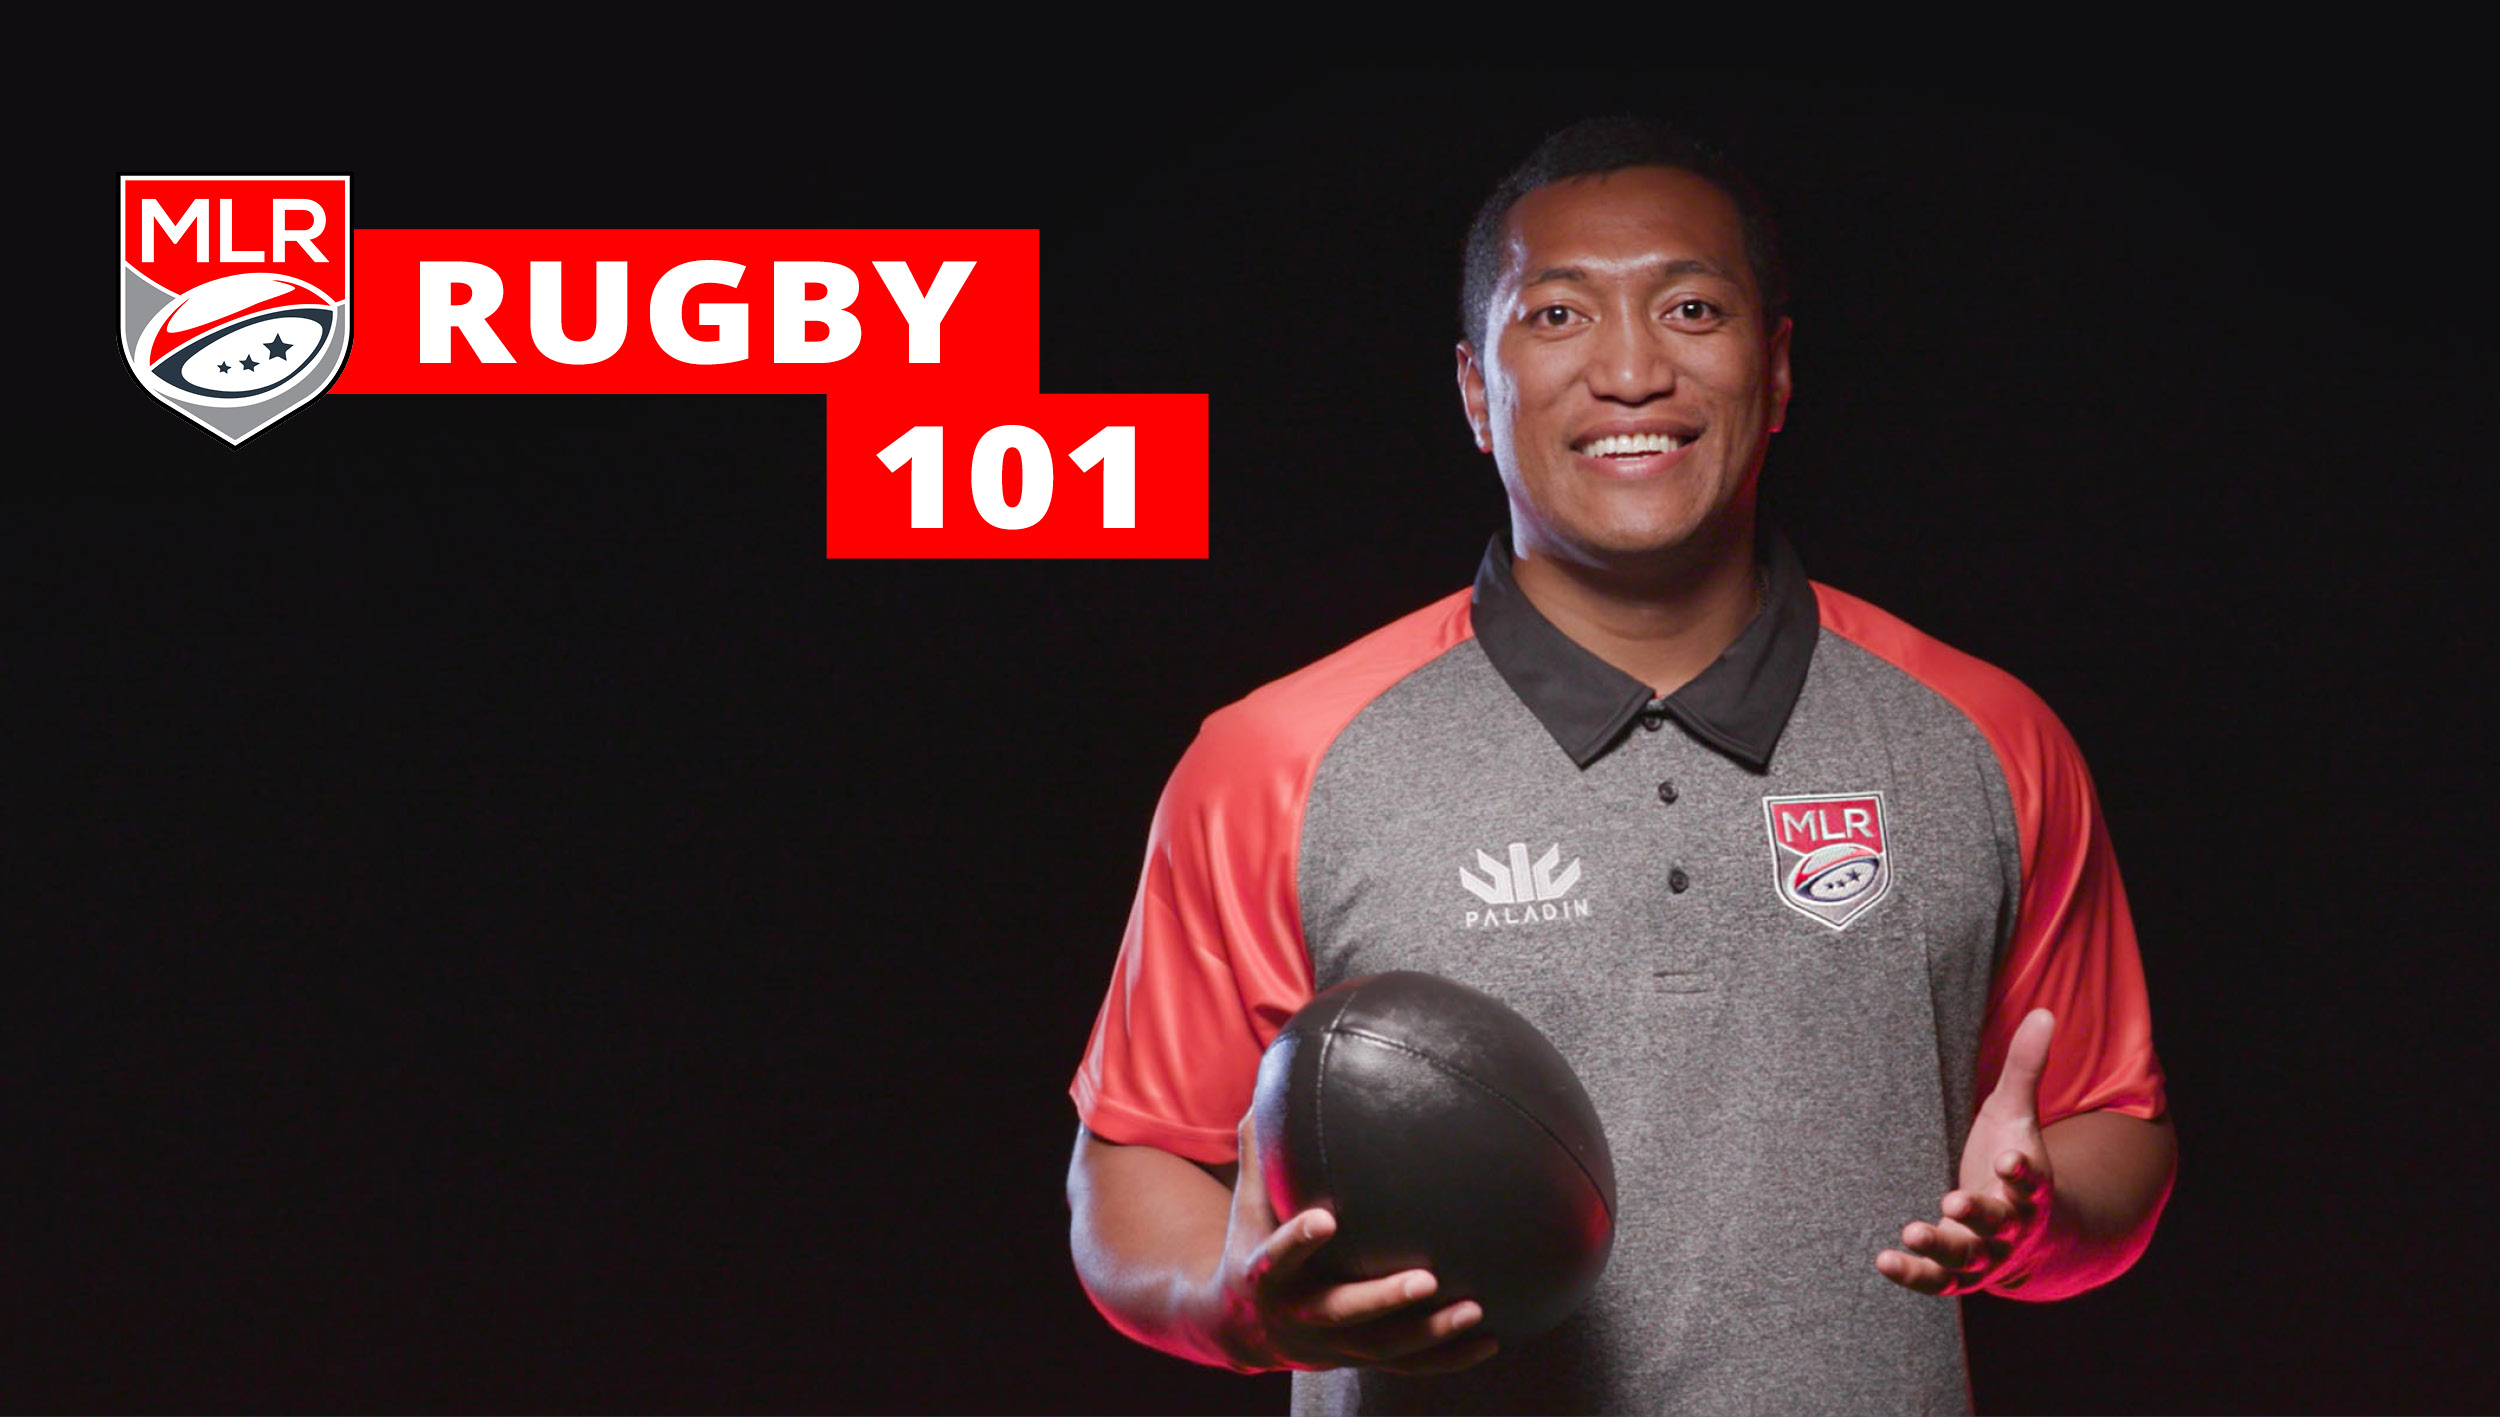 Rugby 101